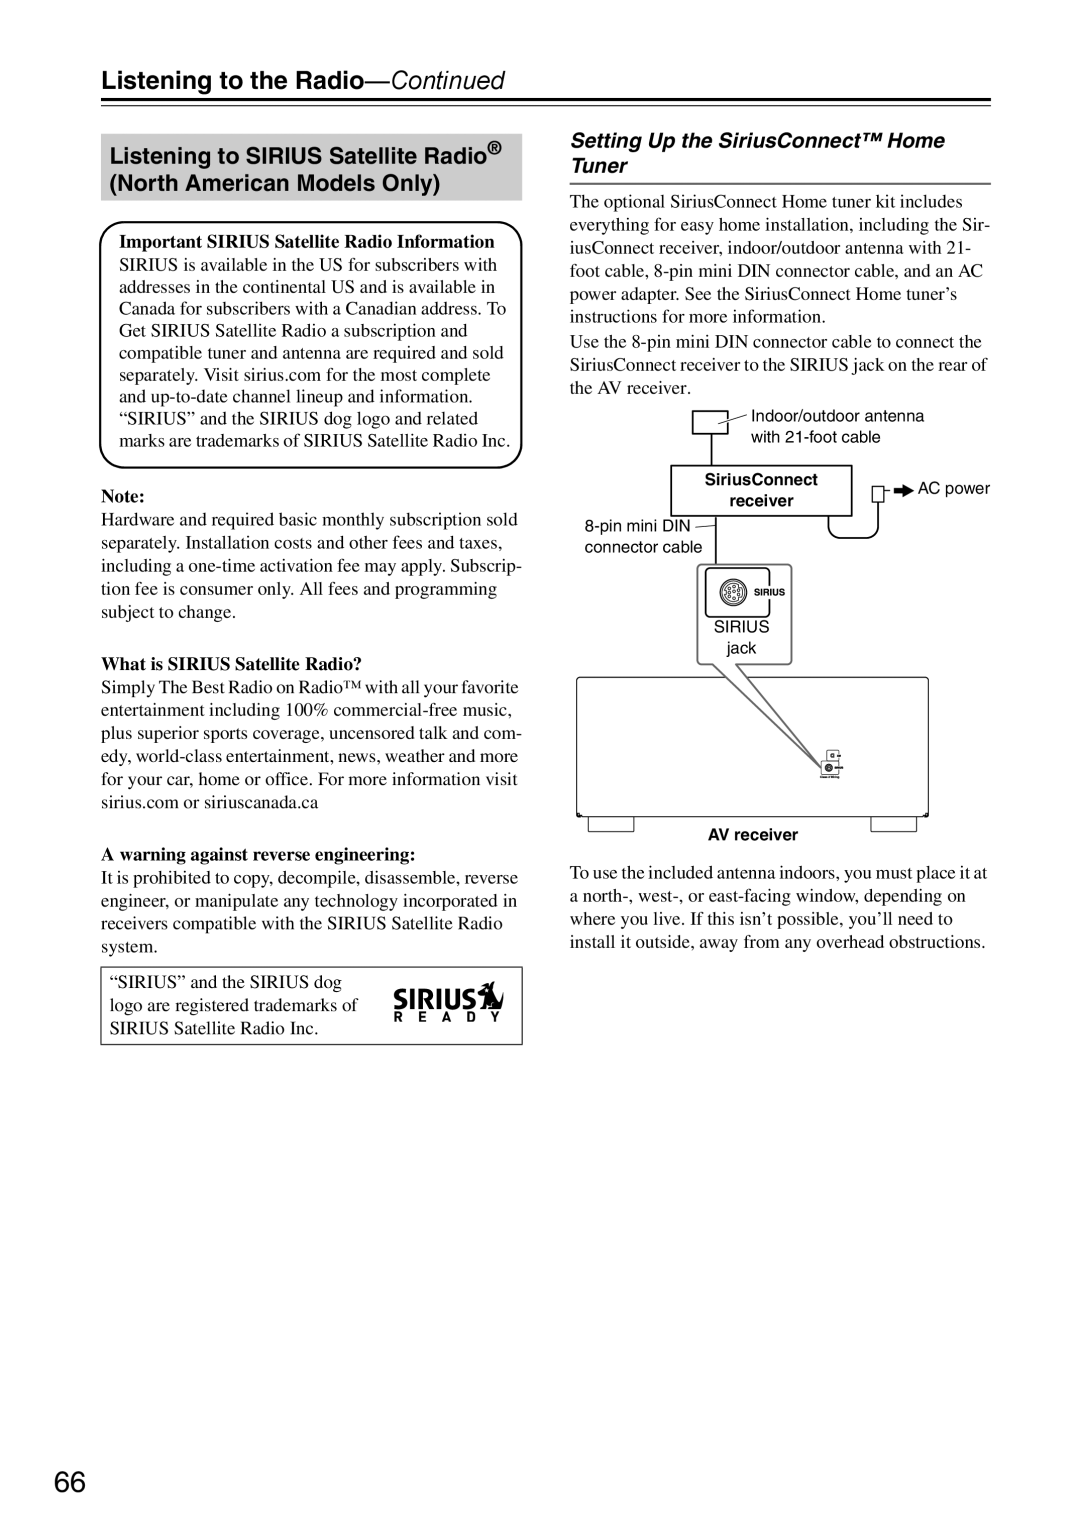 Onkyo DTR-7.9 instruction manual Setting Up the SiriusConnect Home Tuner, Important SIRIUS Satellite Radio Information 